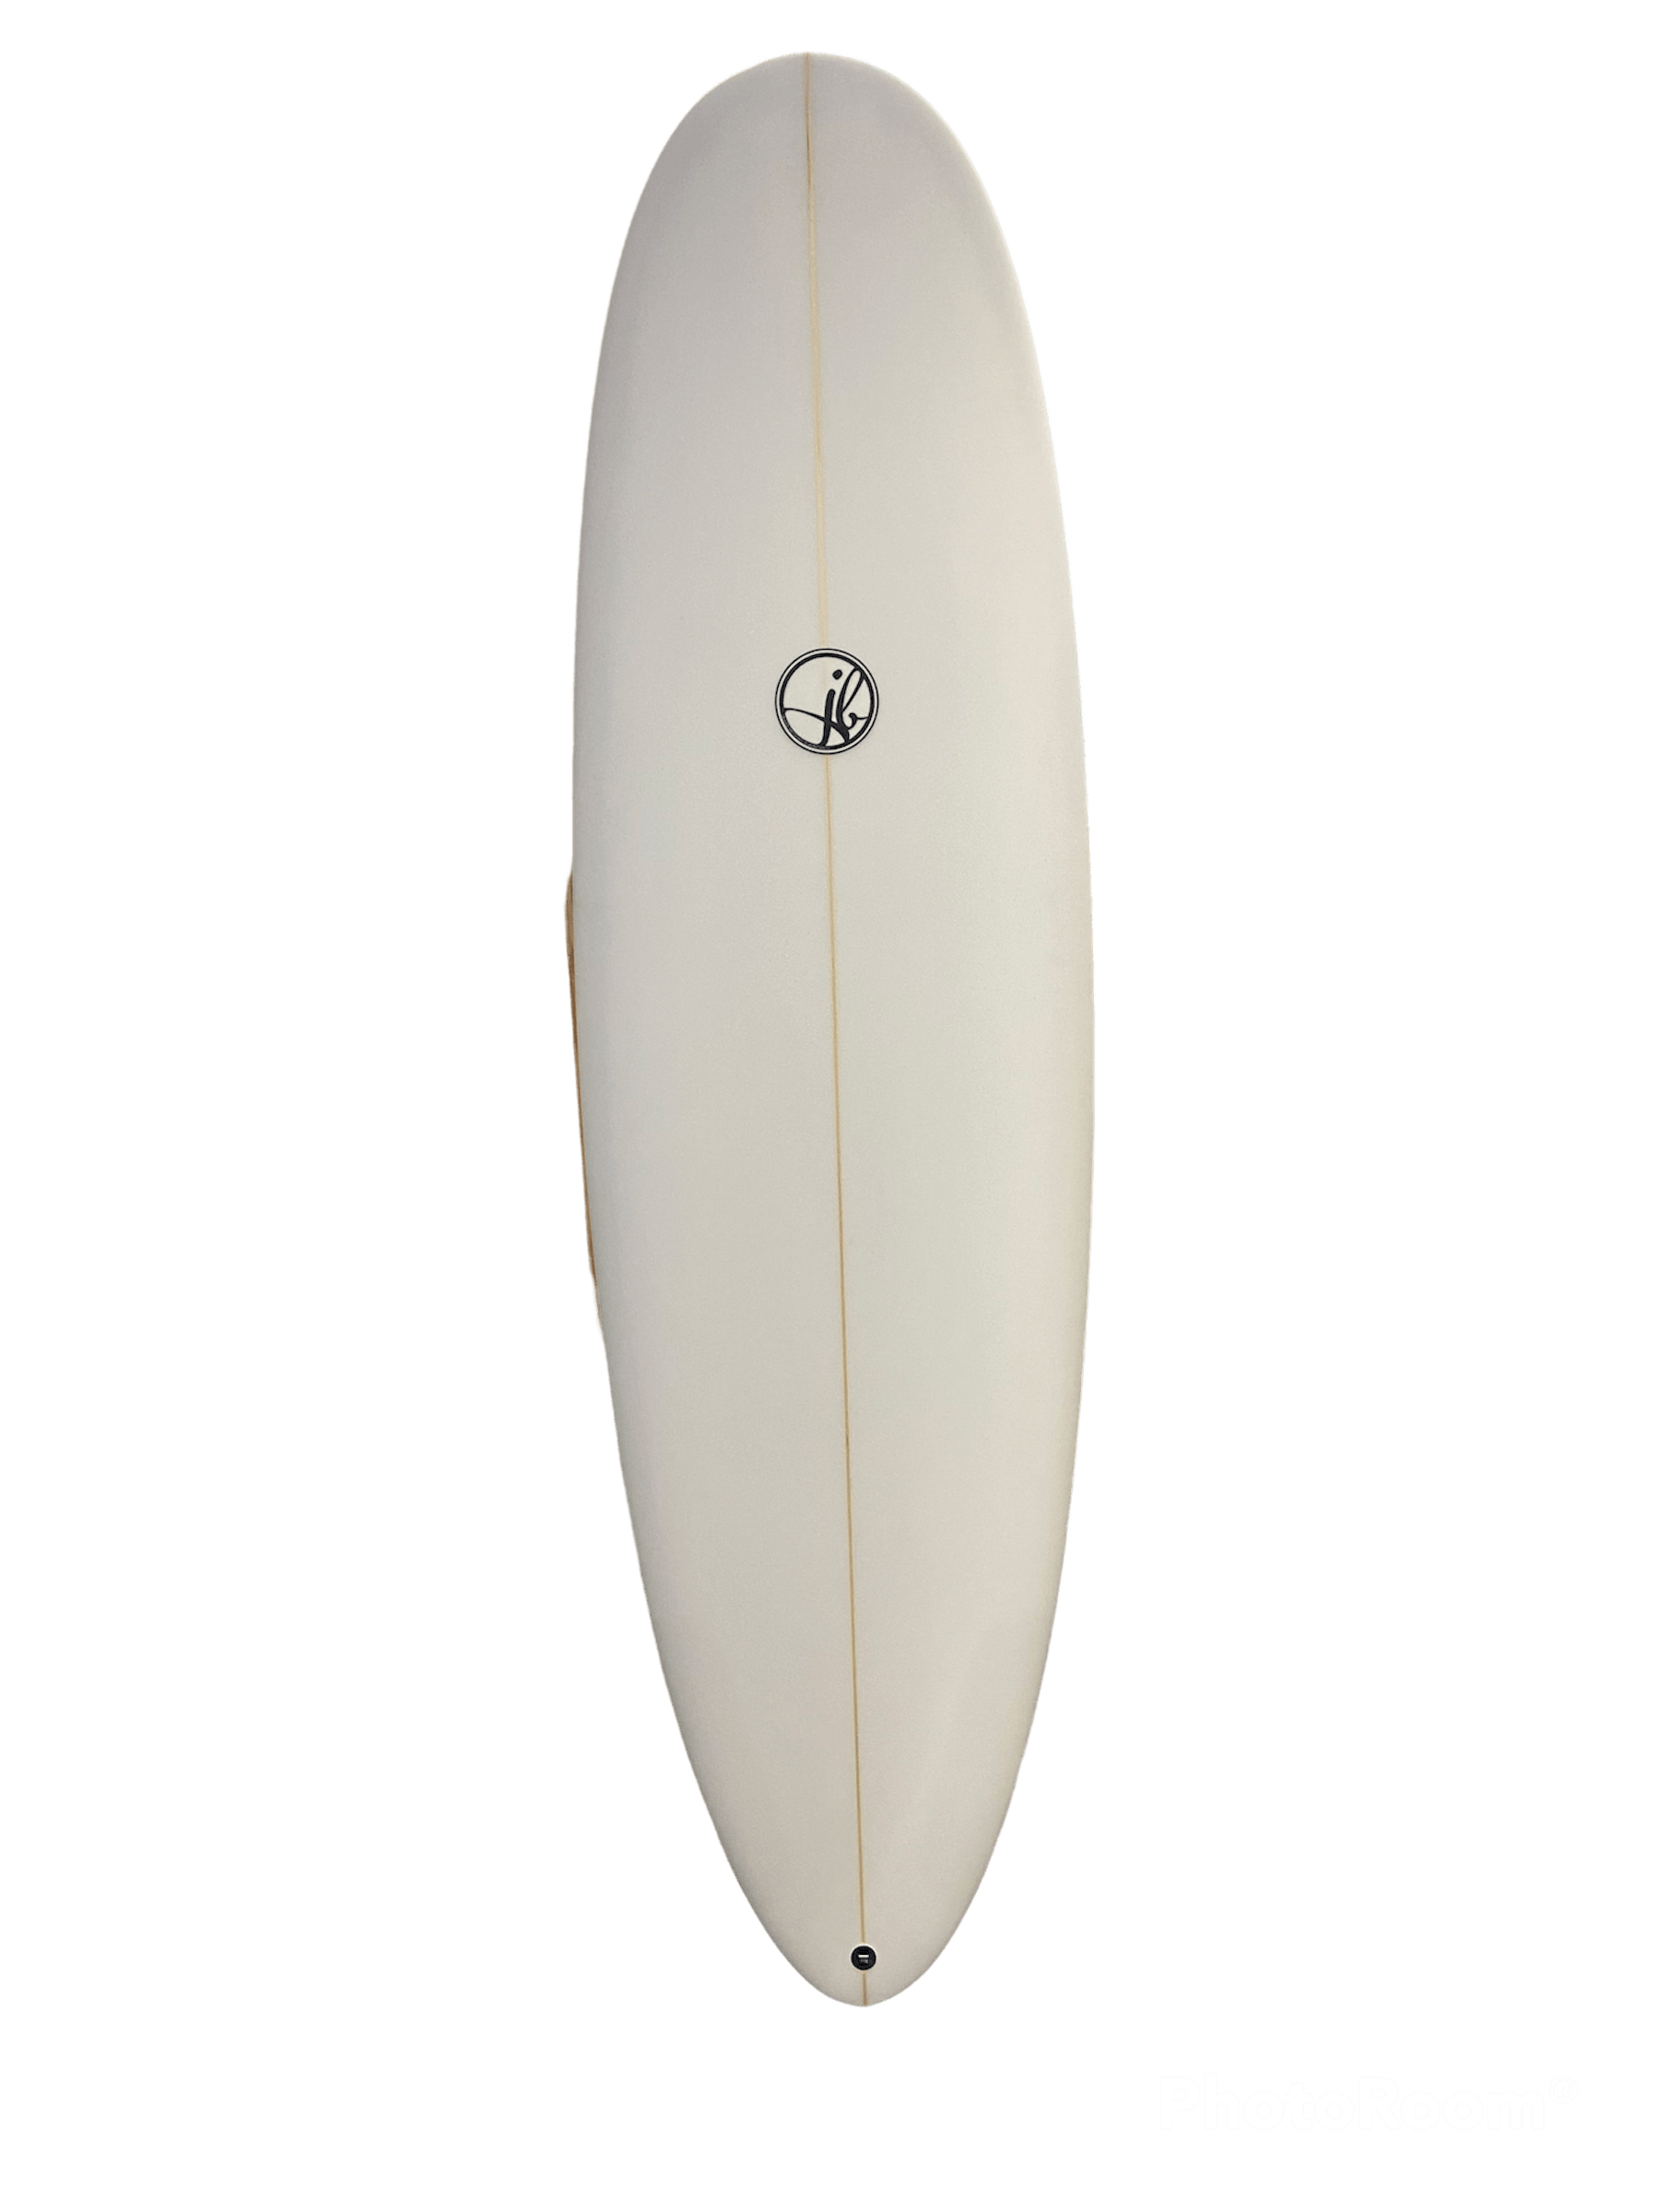 6'2 Muzzy Round Nose Round Tail Surfboard Surfboards